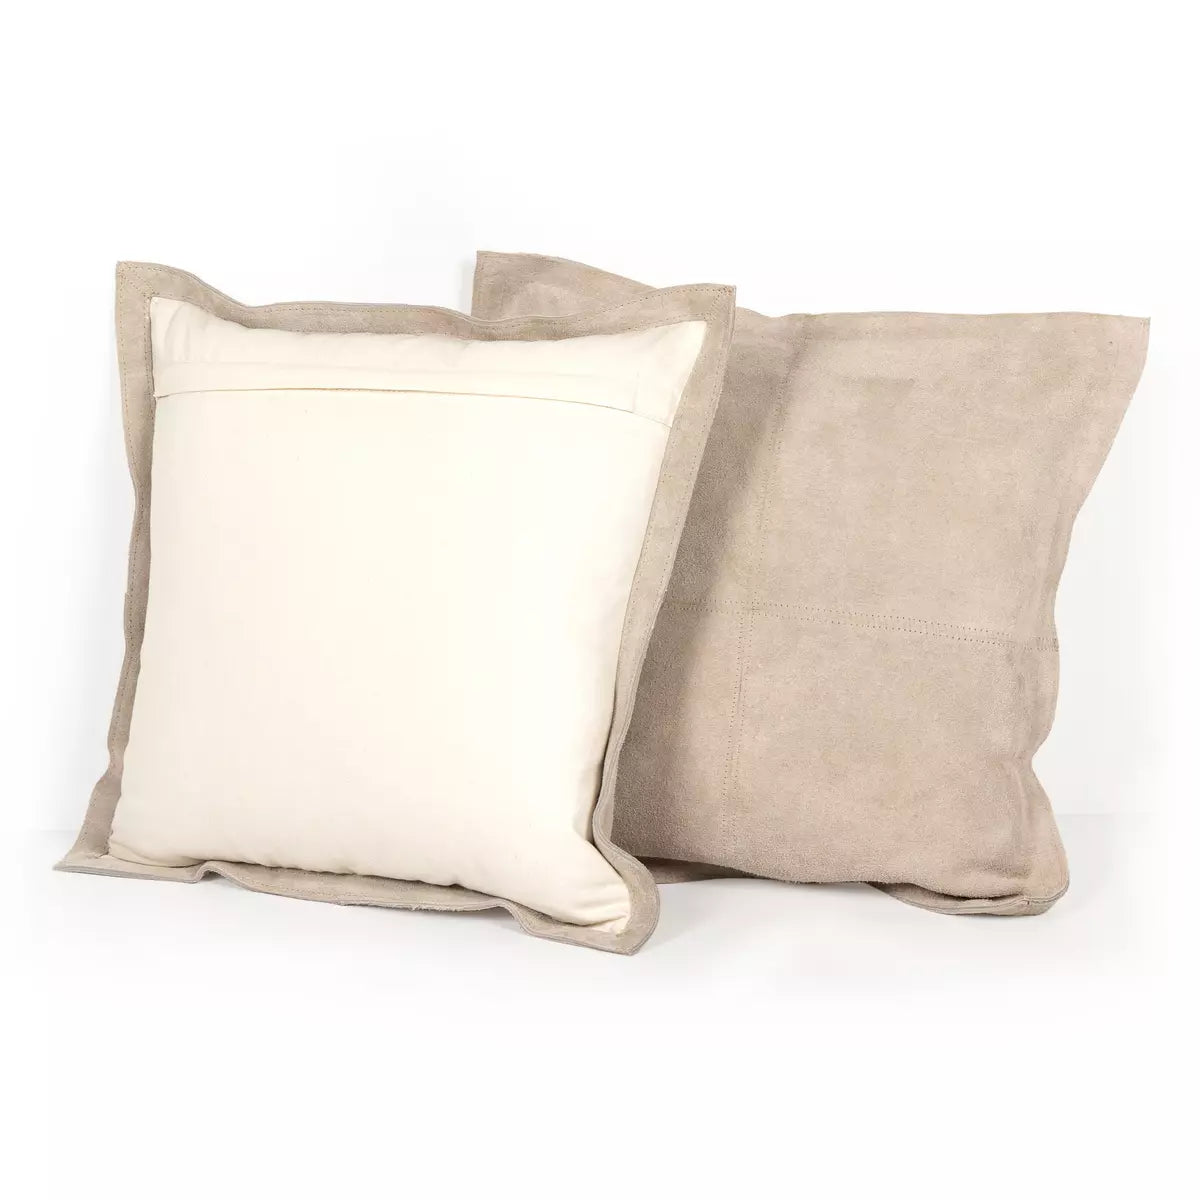 Sophie Pillow Set of 2